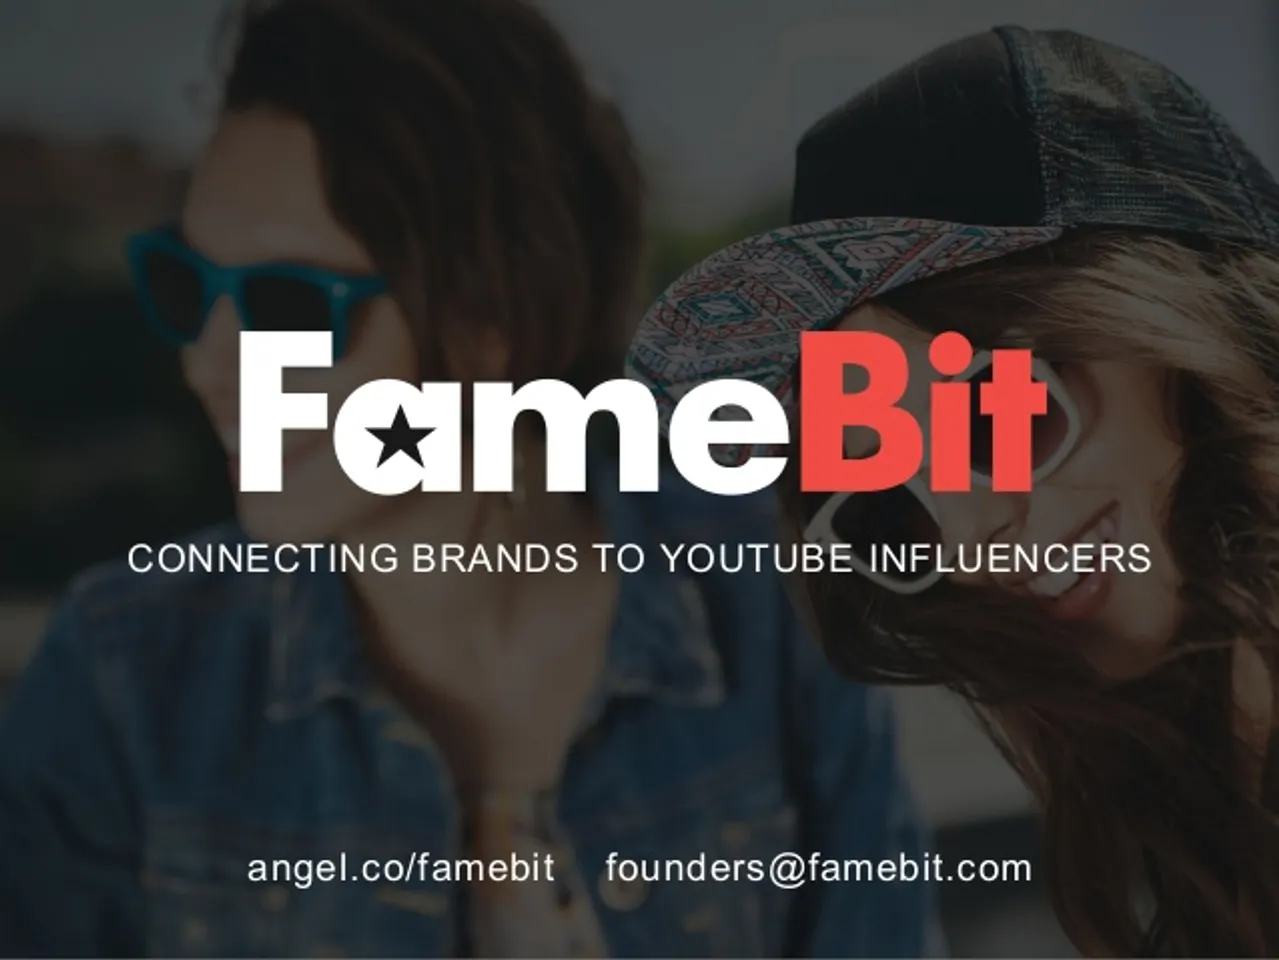 CIOL Google acquires Famebit to bolster branded content deals for YouTube